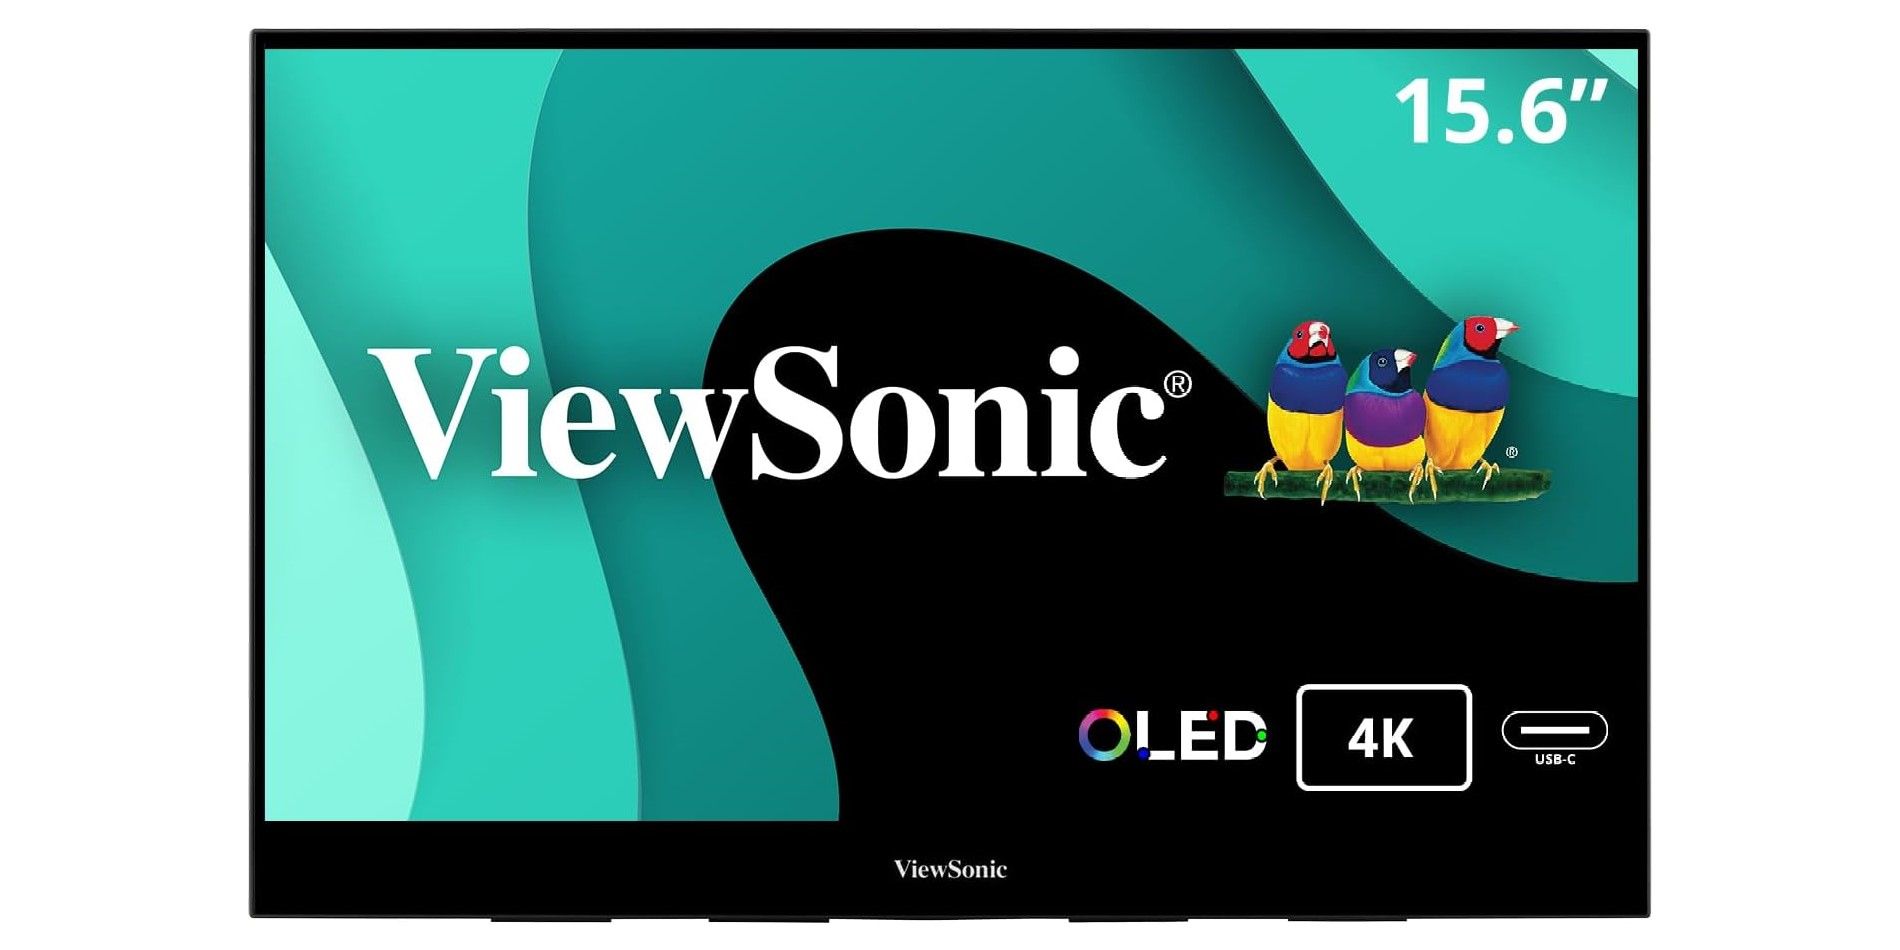 ViewSonic VX1655 4K OLED 15.6 Inch Portable OLED Monitor